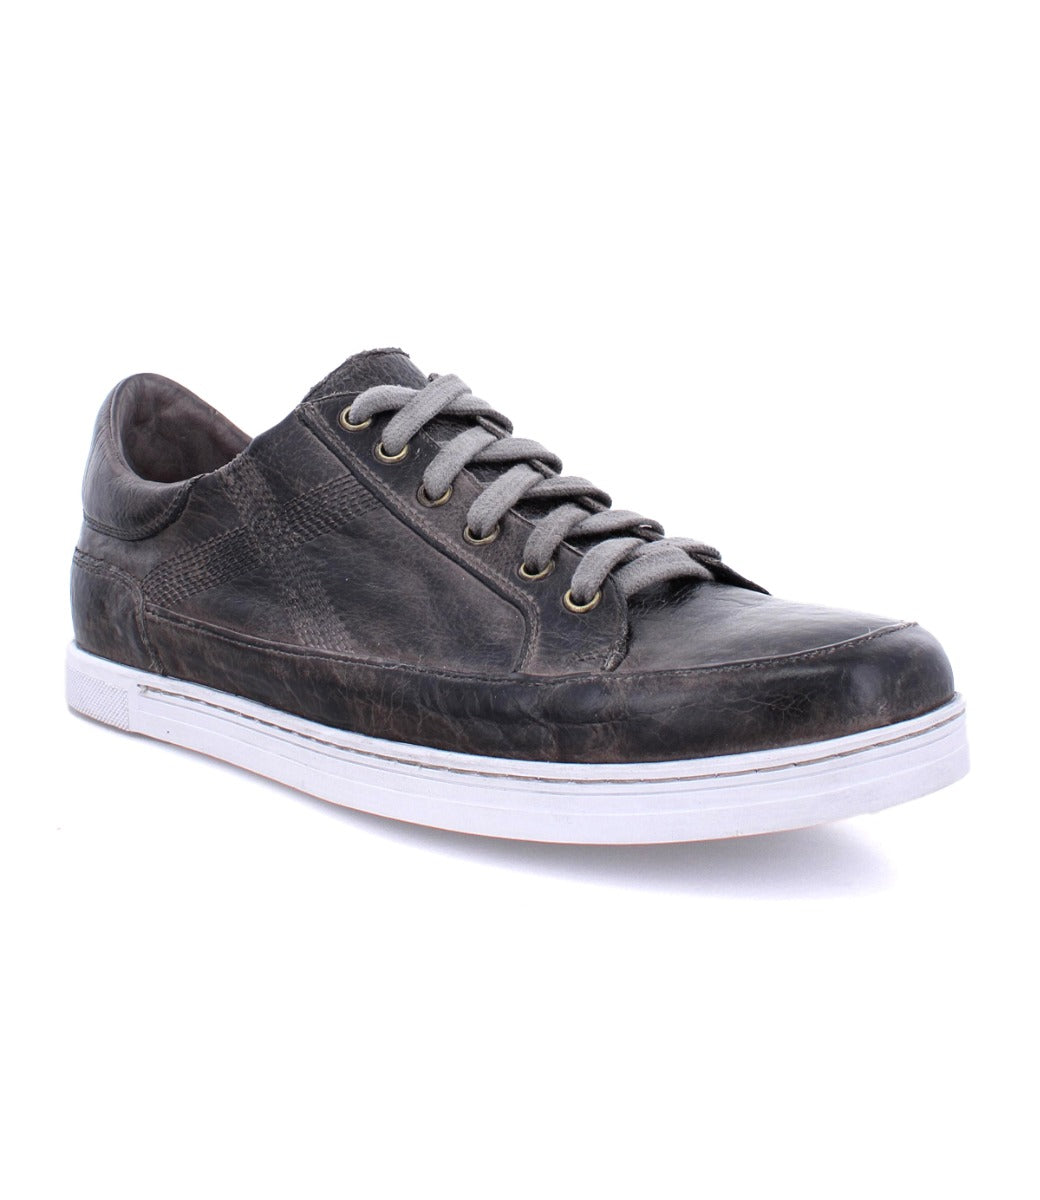 A Bed Stu men's grey leather Wizard sneaker with white laces.